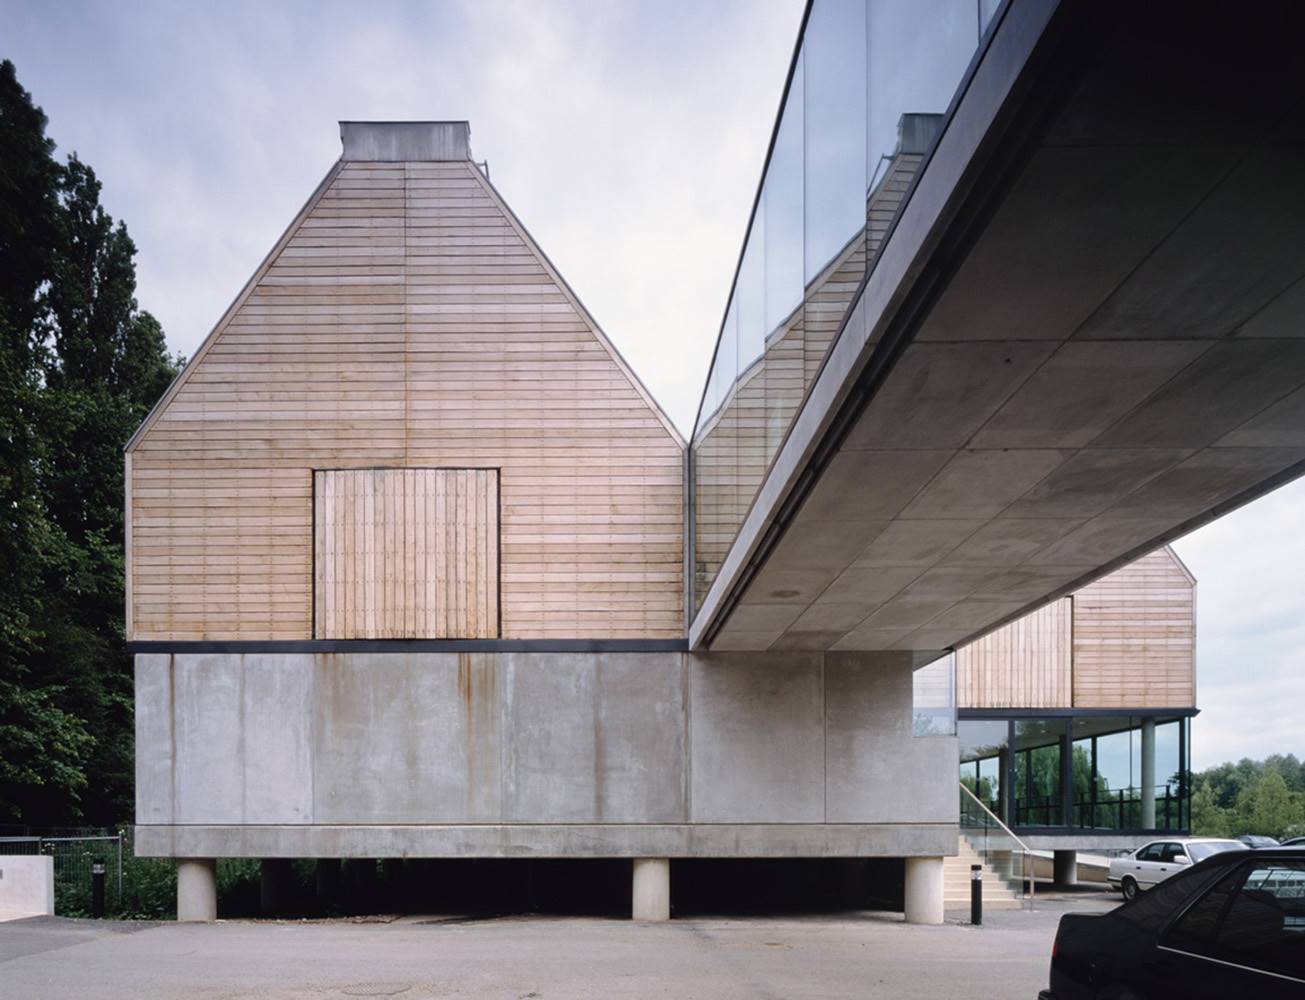 Museo River Rowing, Henley-on-Thames, Reino Unido, David Chipperfield (1997)